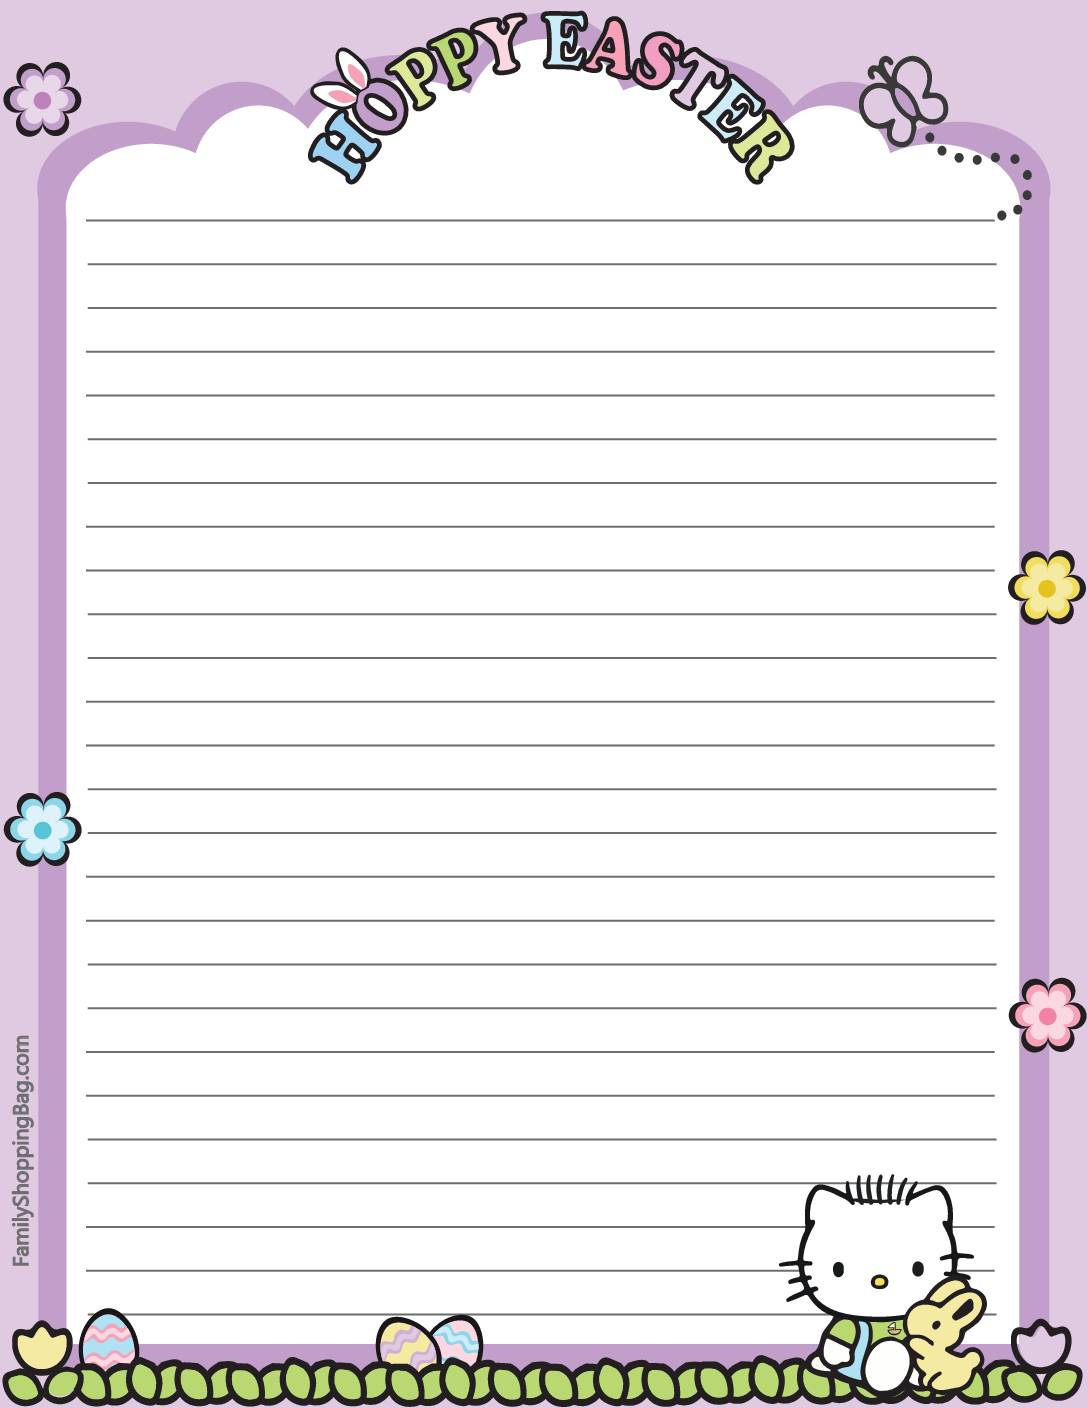 Stationery 3 Easter